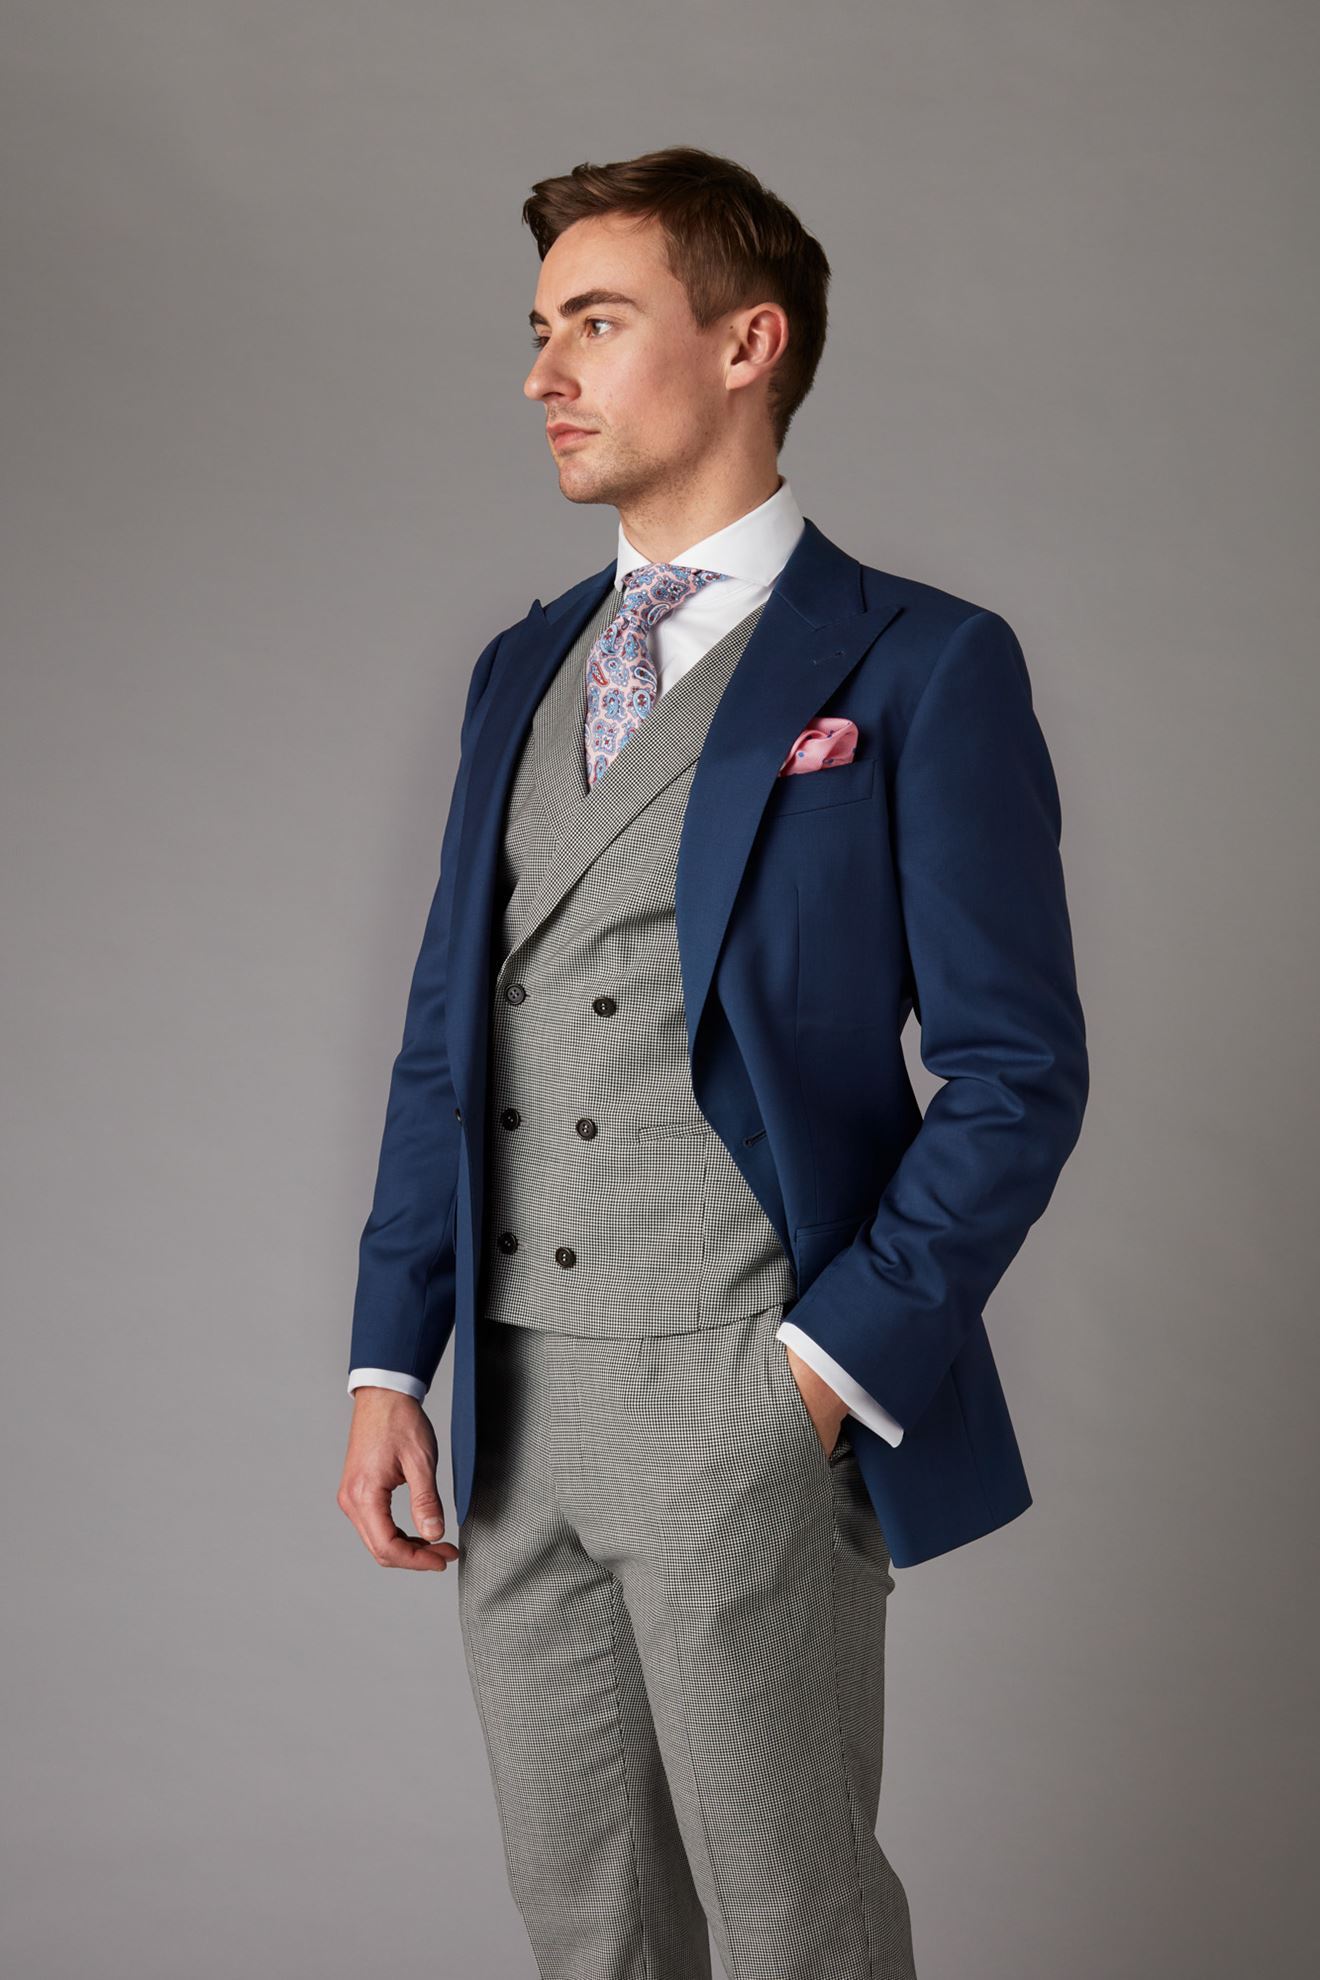 Picture of Dogtooth Suit with Navy Jacket